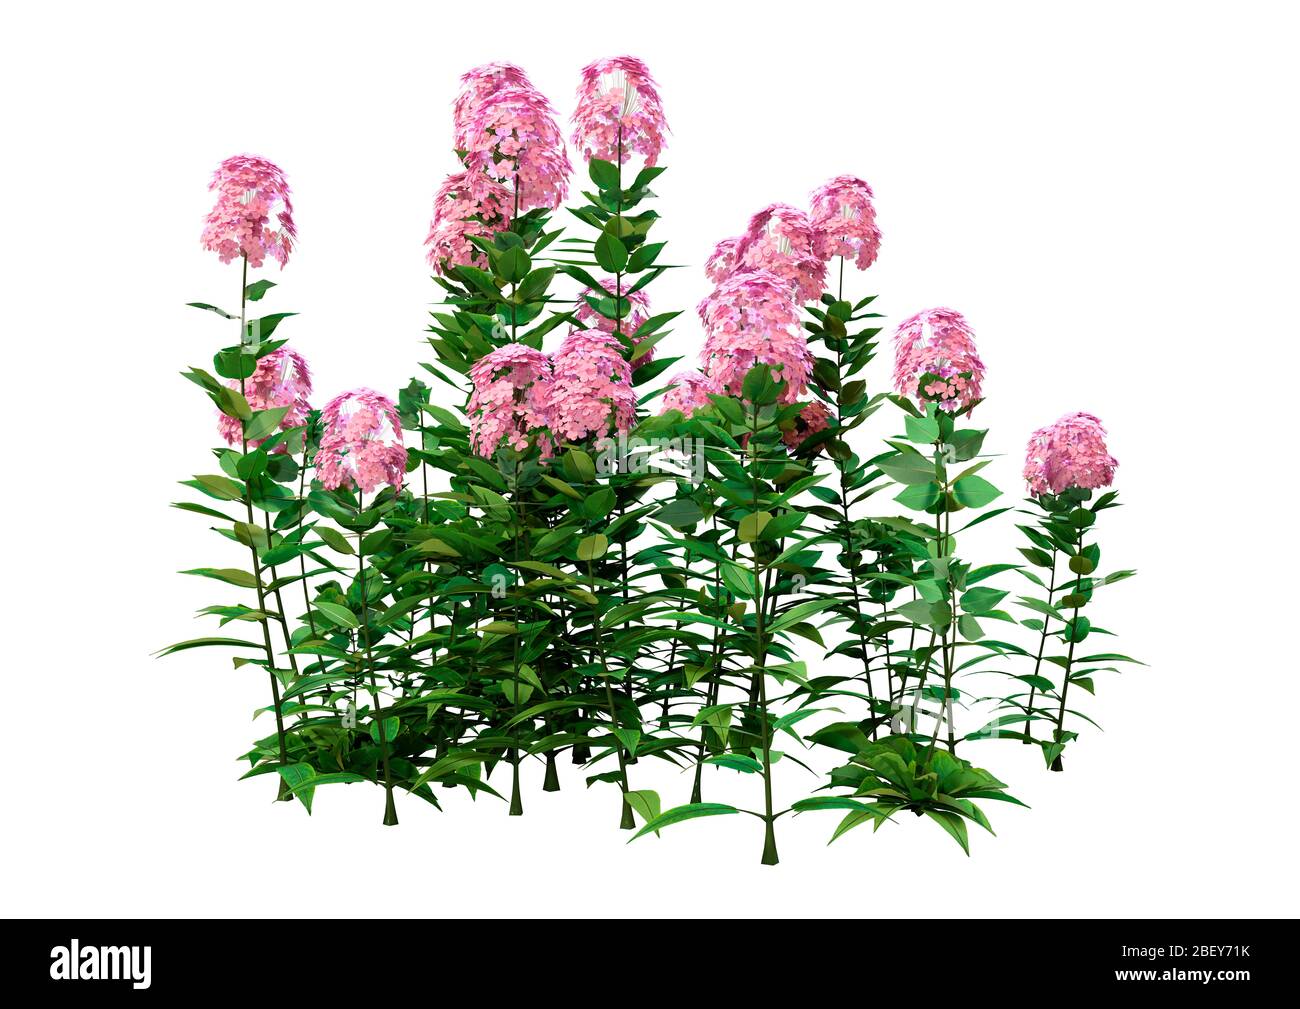 3D rendering of border Phlox or Phlox paniculata flowers isolated on white background Stock Photo